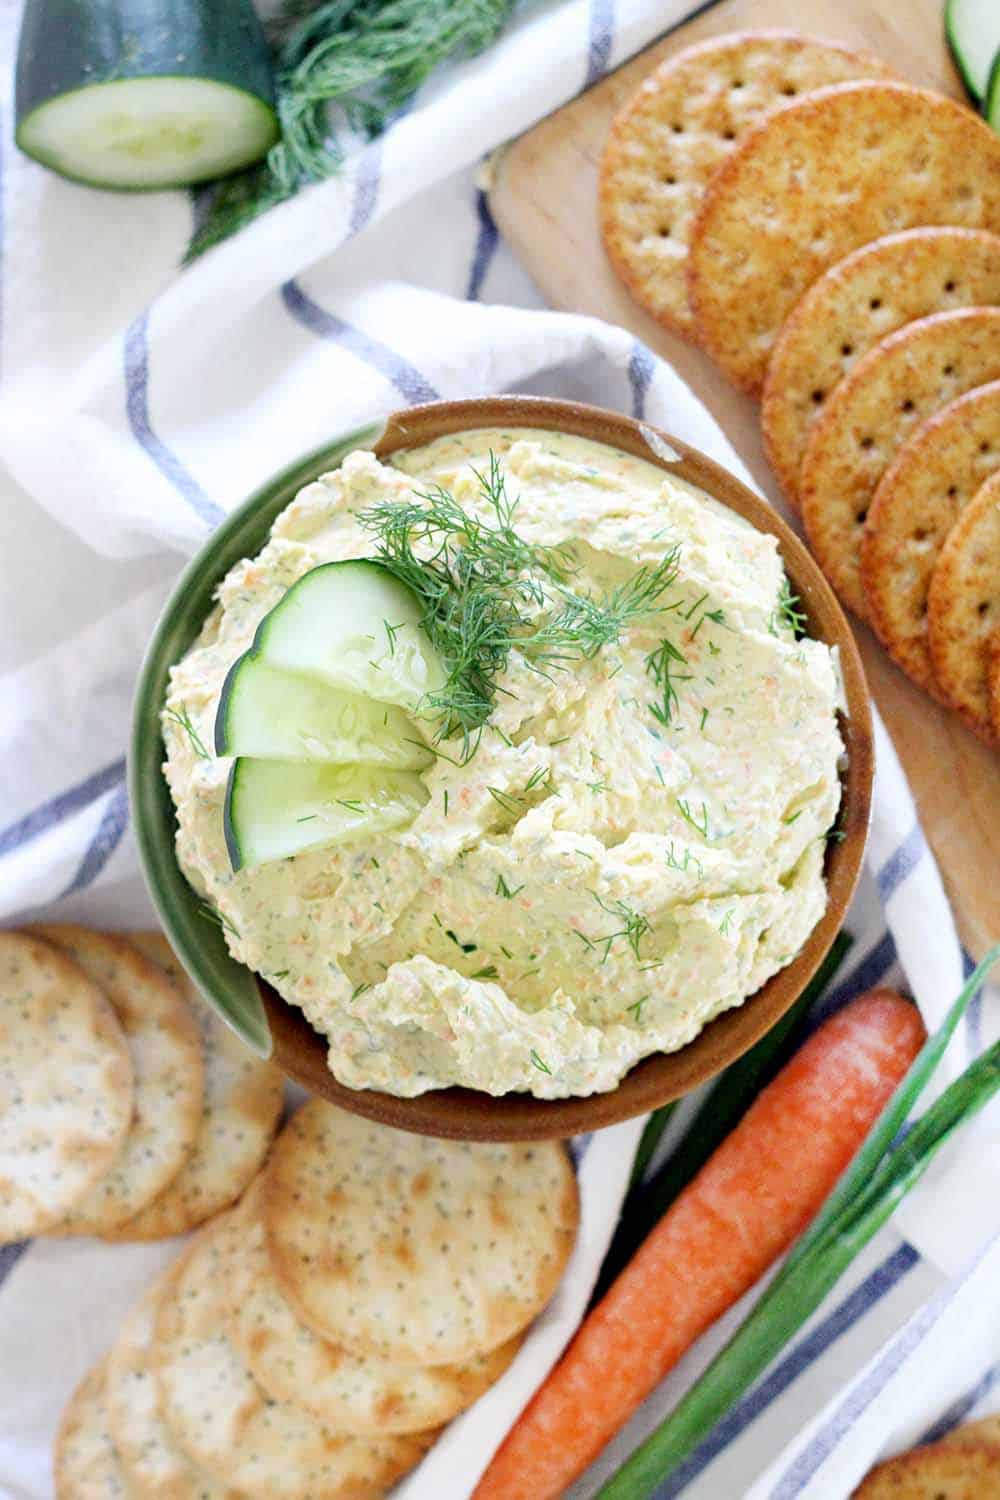 This veggie cream cheese is great as a dip for crackers or veggies, and equally amazing on sandwiches with cucumber slices as a light lunch or classy appetizer. It's gluten-free, vegetarian, and only takes a few minutes to make!